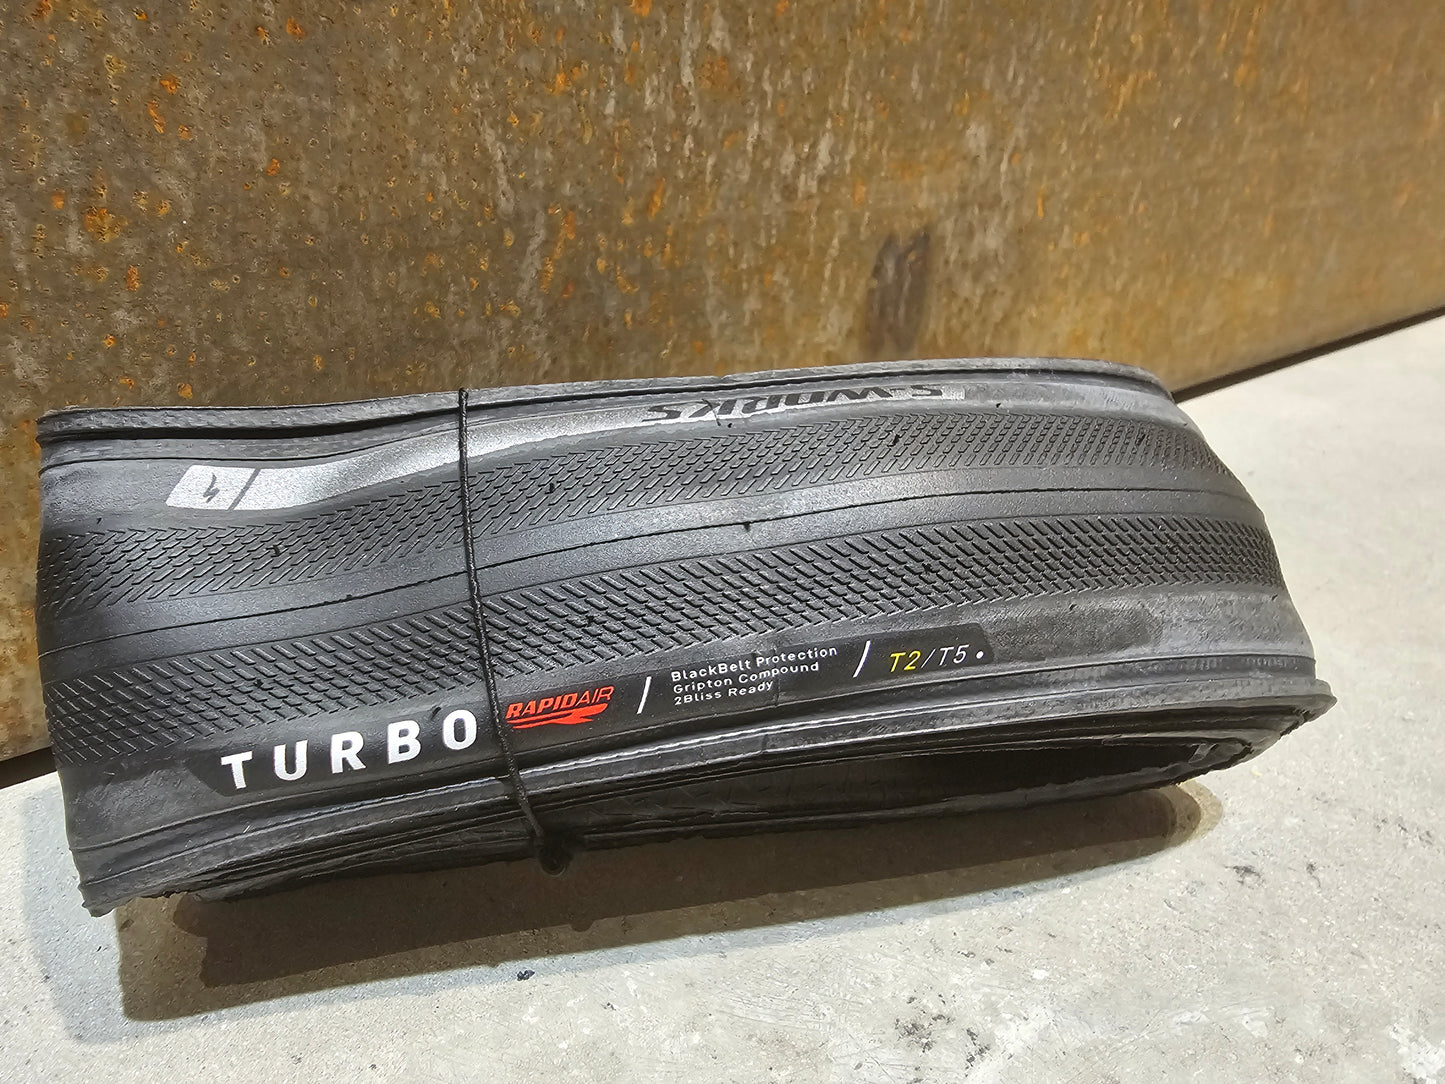 SPECIALIZED S-WORKS TURBO T2/T5 RAPIDAIR 2BLISS READY TIRE 700C X 26MM